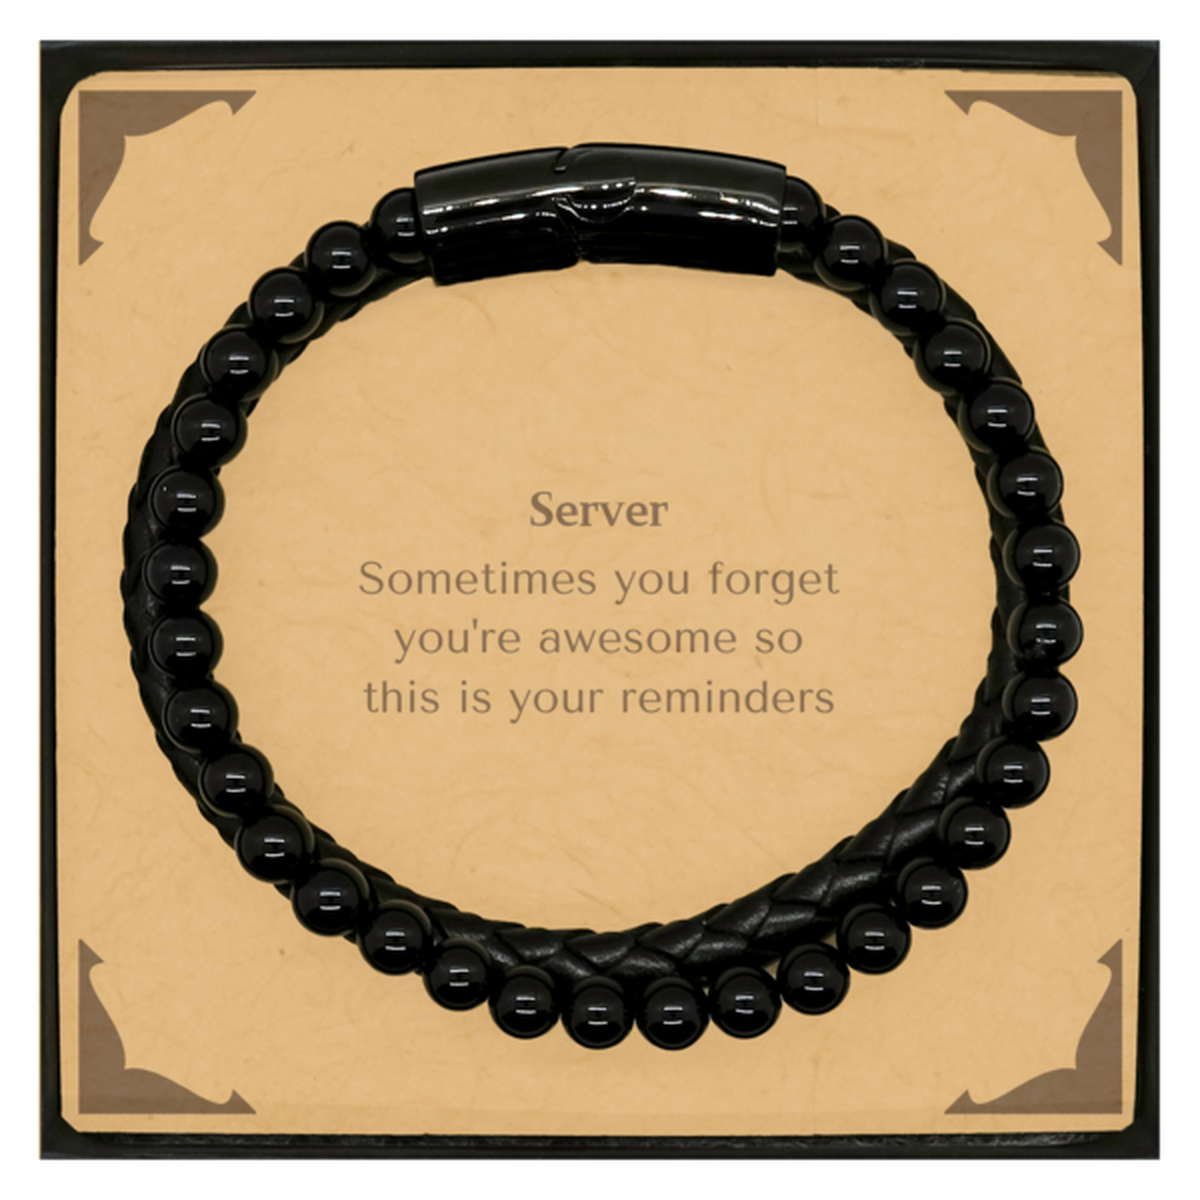 Sentimental Server Stone Leather Bracelets, Server Sometimes you forget you're awesome so this is your reminders, Graduation Christmas Birthday Gifts for Server, Men, Women, Coworkers